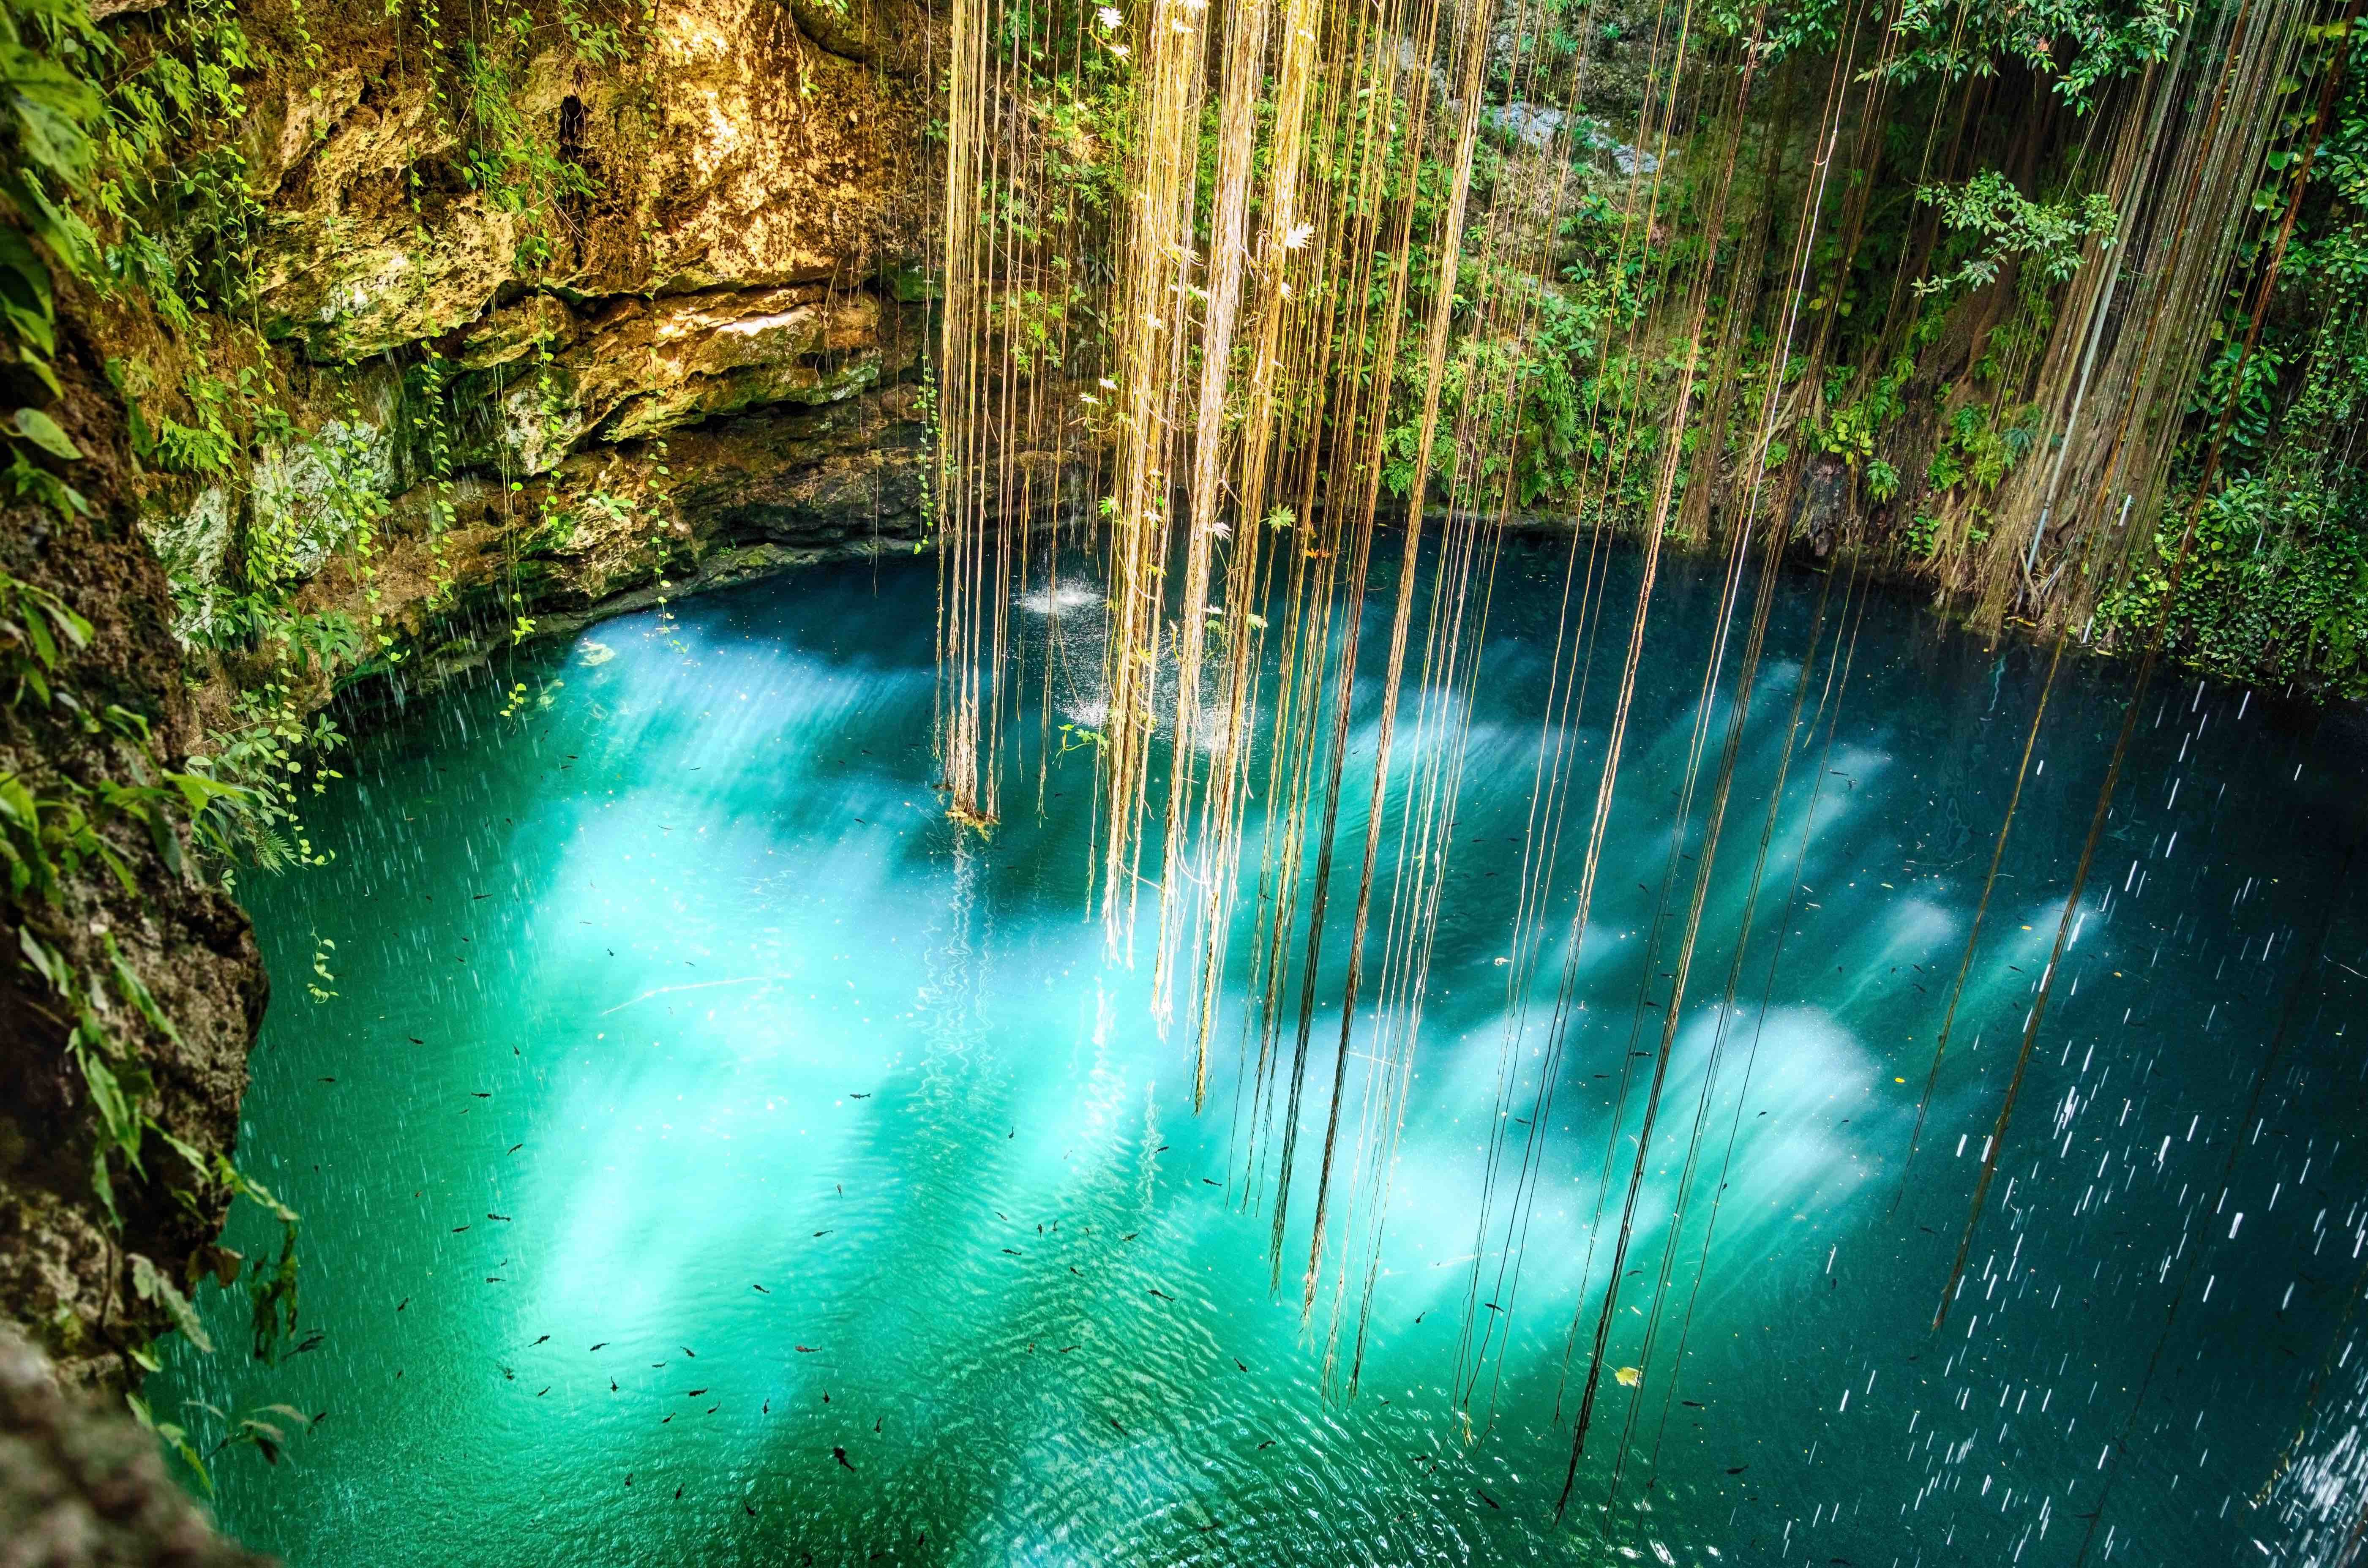 Dive into nature: 9 natural swimming pools around the world